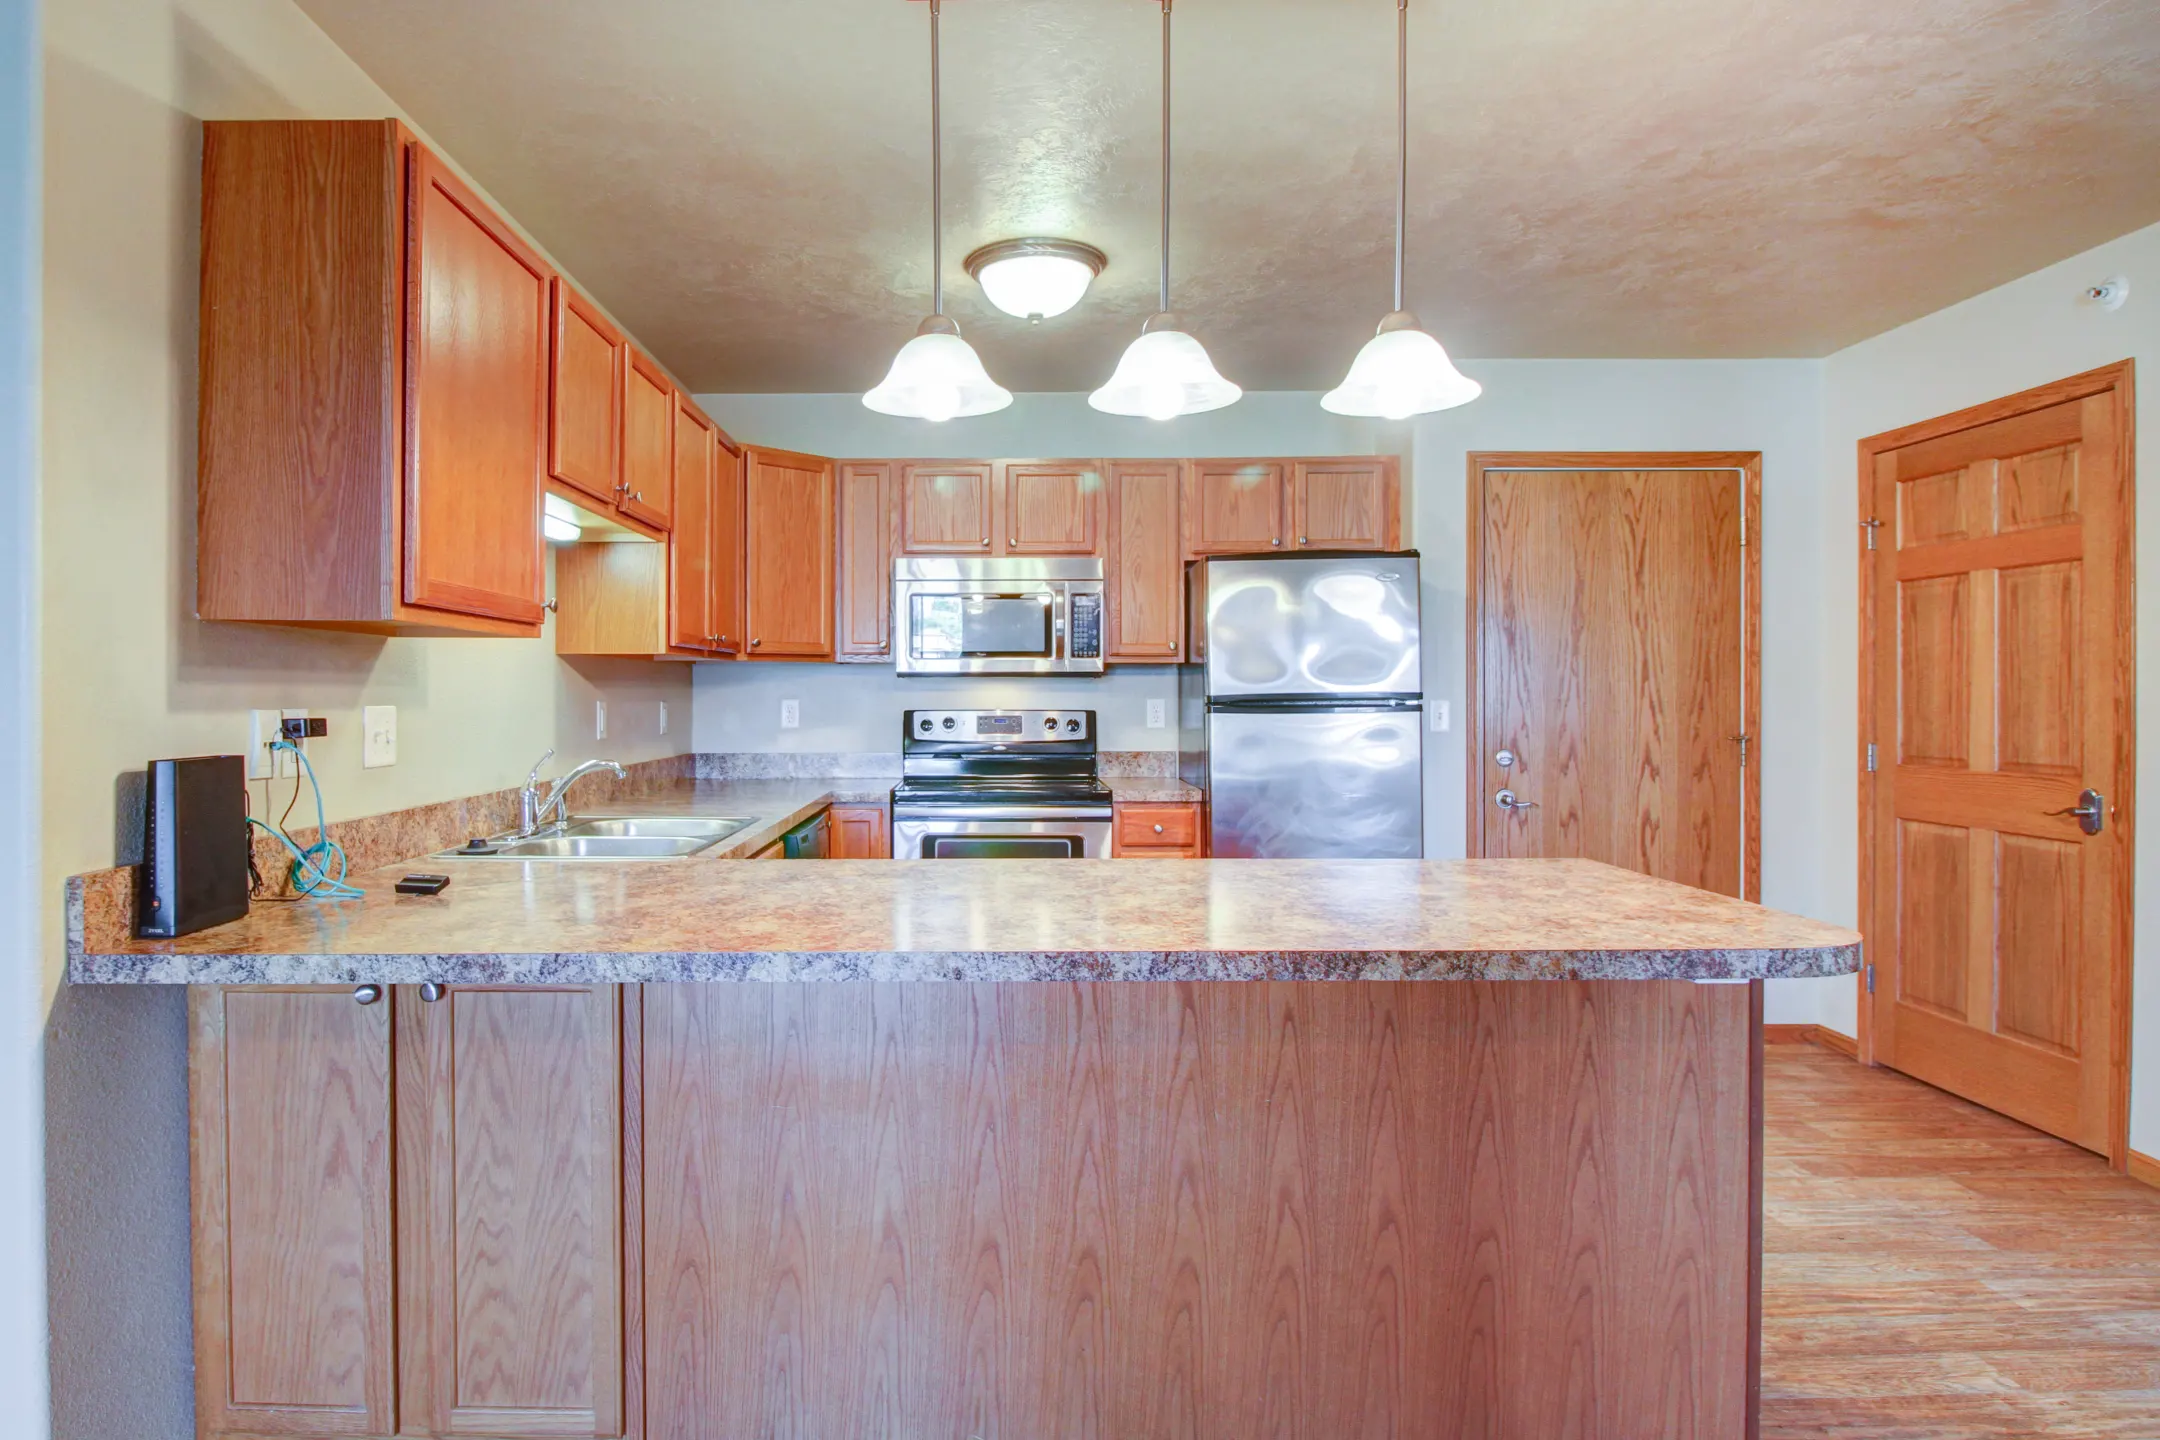 Kitchen - Northdale Apartments - Minot, ND